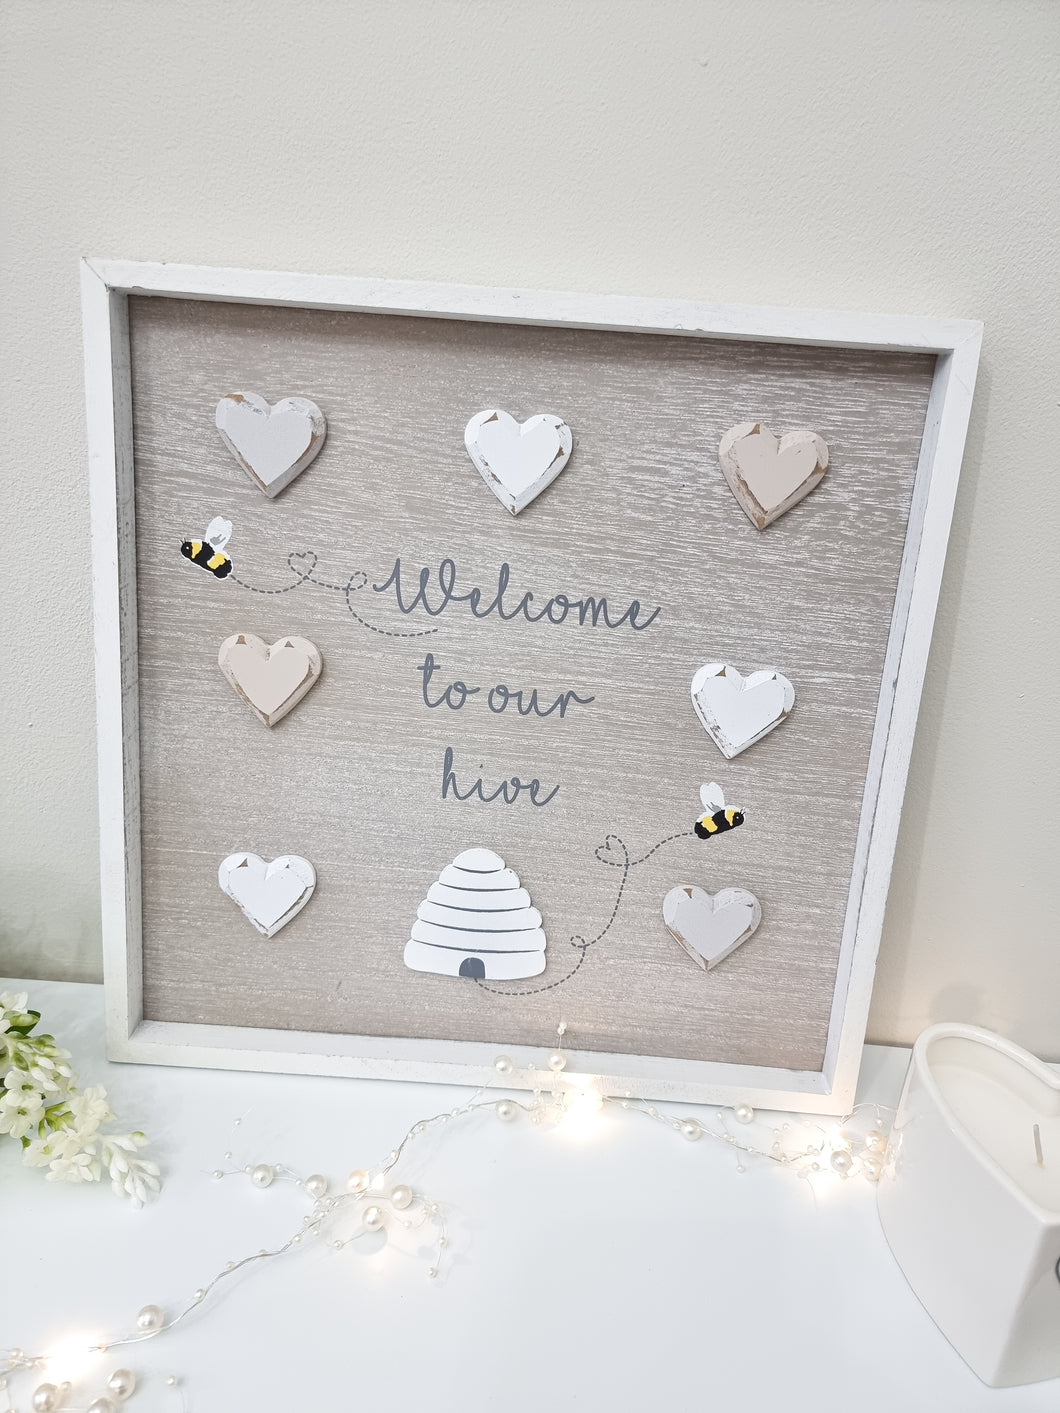 Welcome To Our Hive 3D Heart Framed Plaque